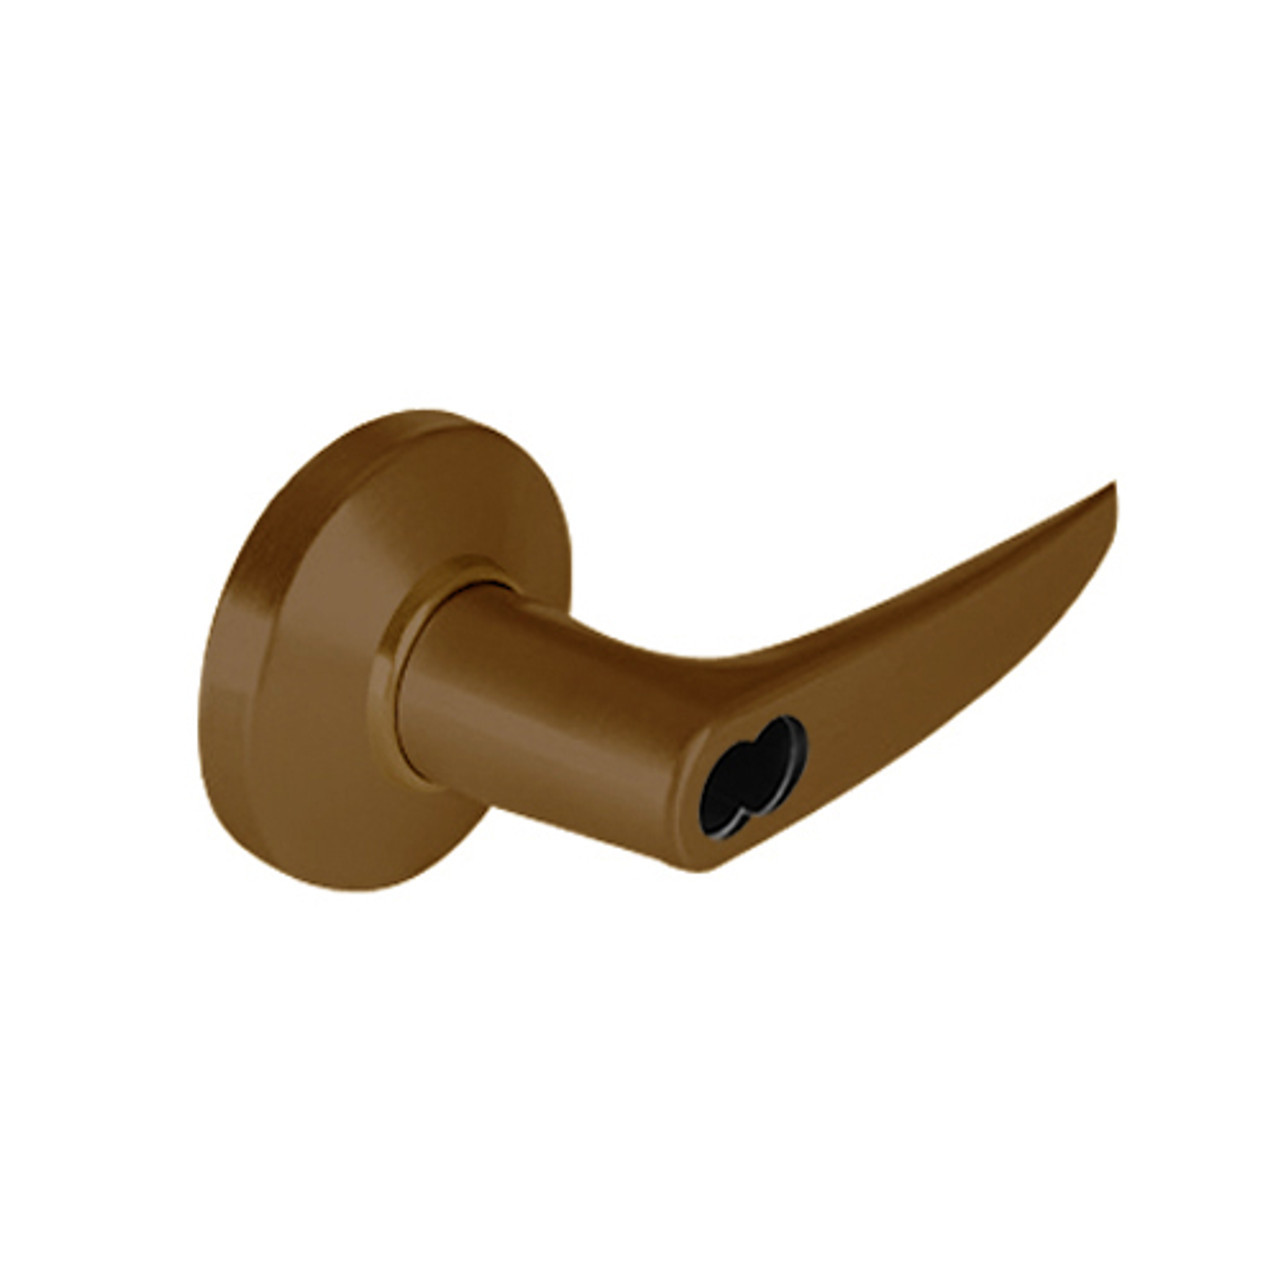 9K37DR16CS3690LM Best 9K Series Special Function Cylindrical Lever Locks with Curved without Return Lever Design Accept 7 Pin Best Core in Dark Bronze